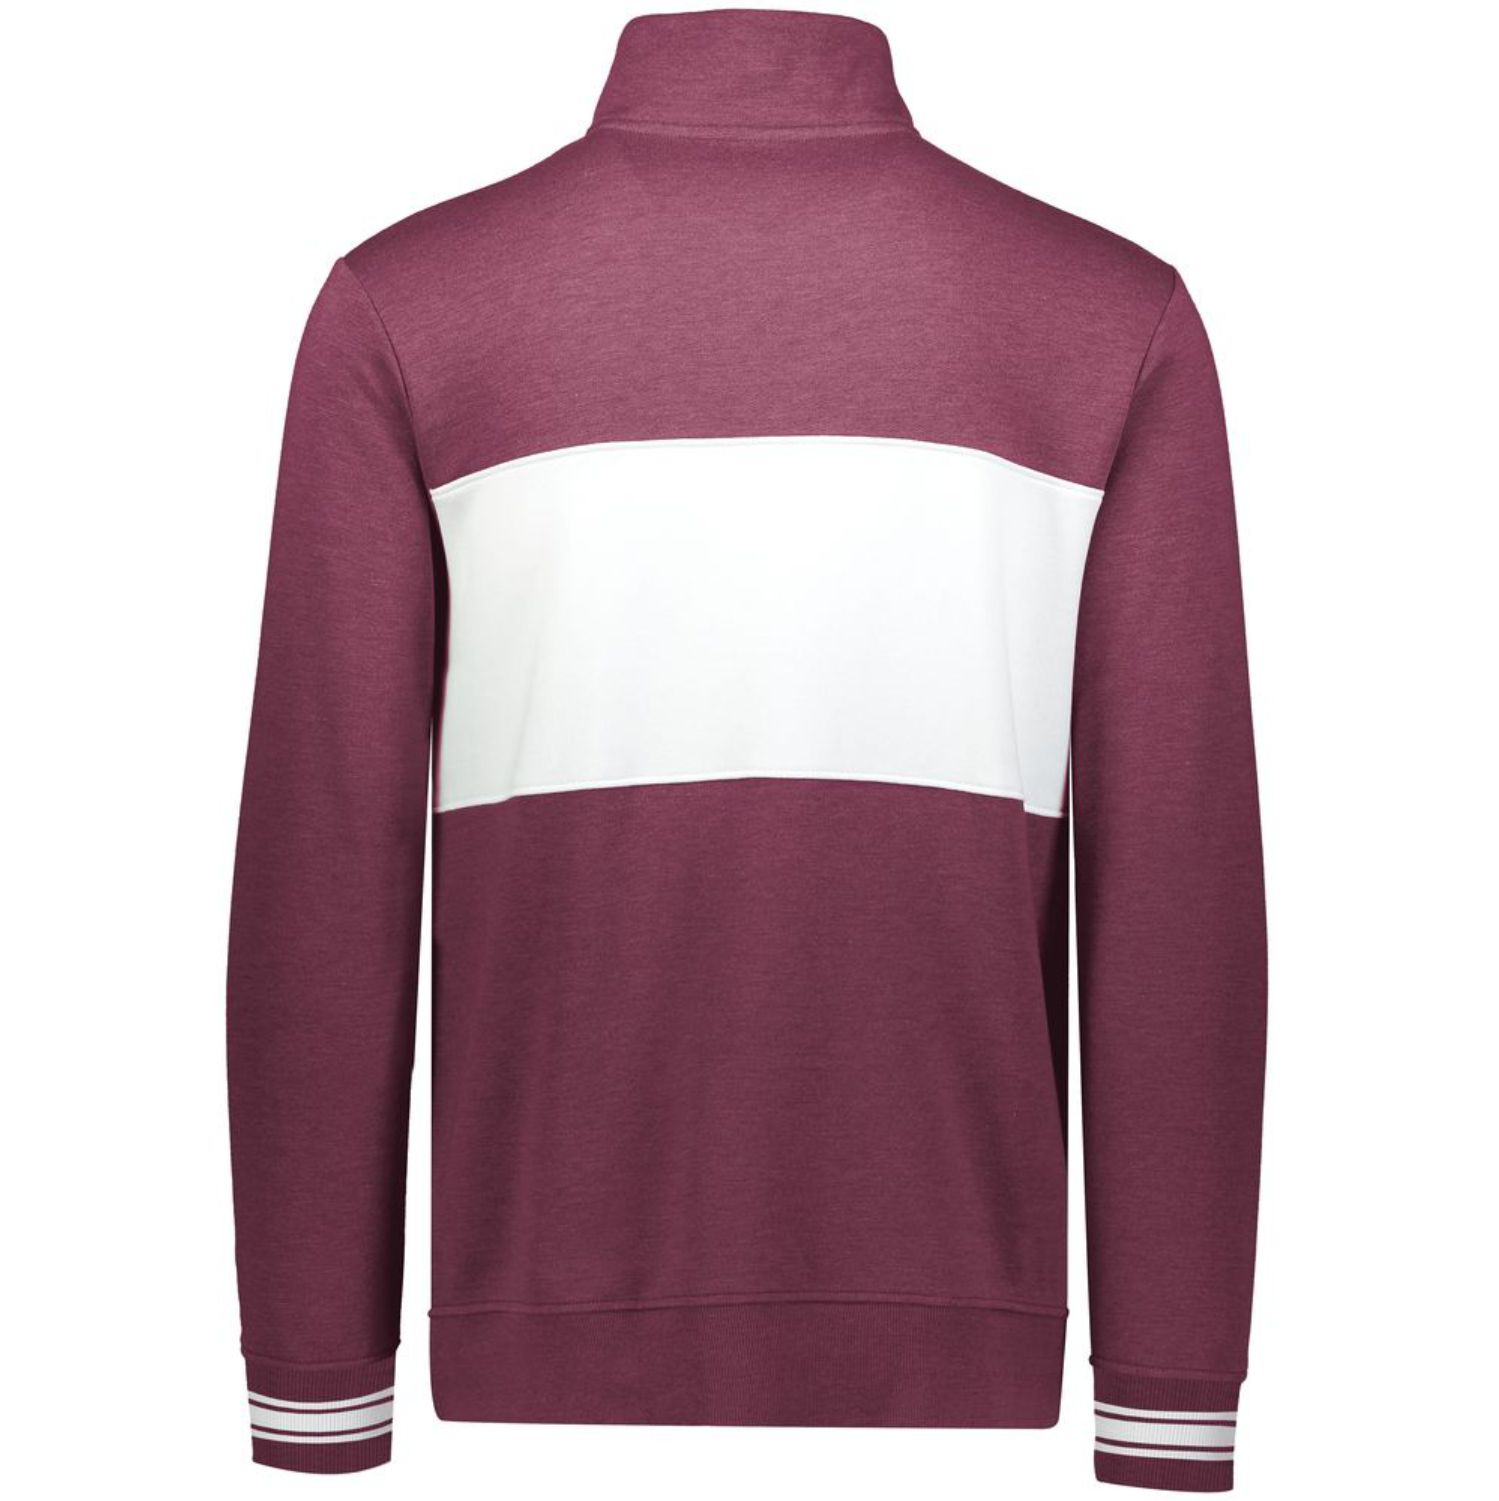 Holloway Ivy League Pullover #229565 Maroon Heather Back